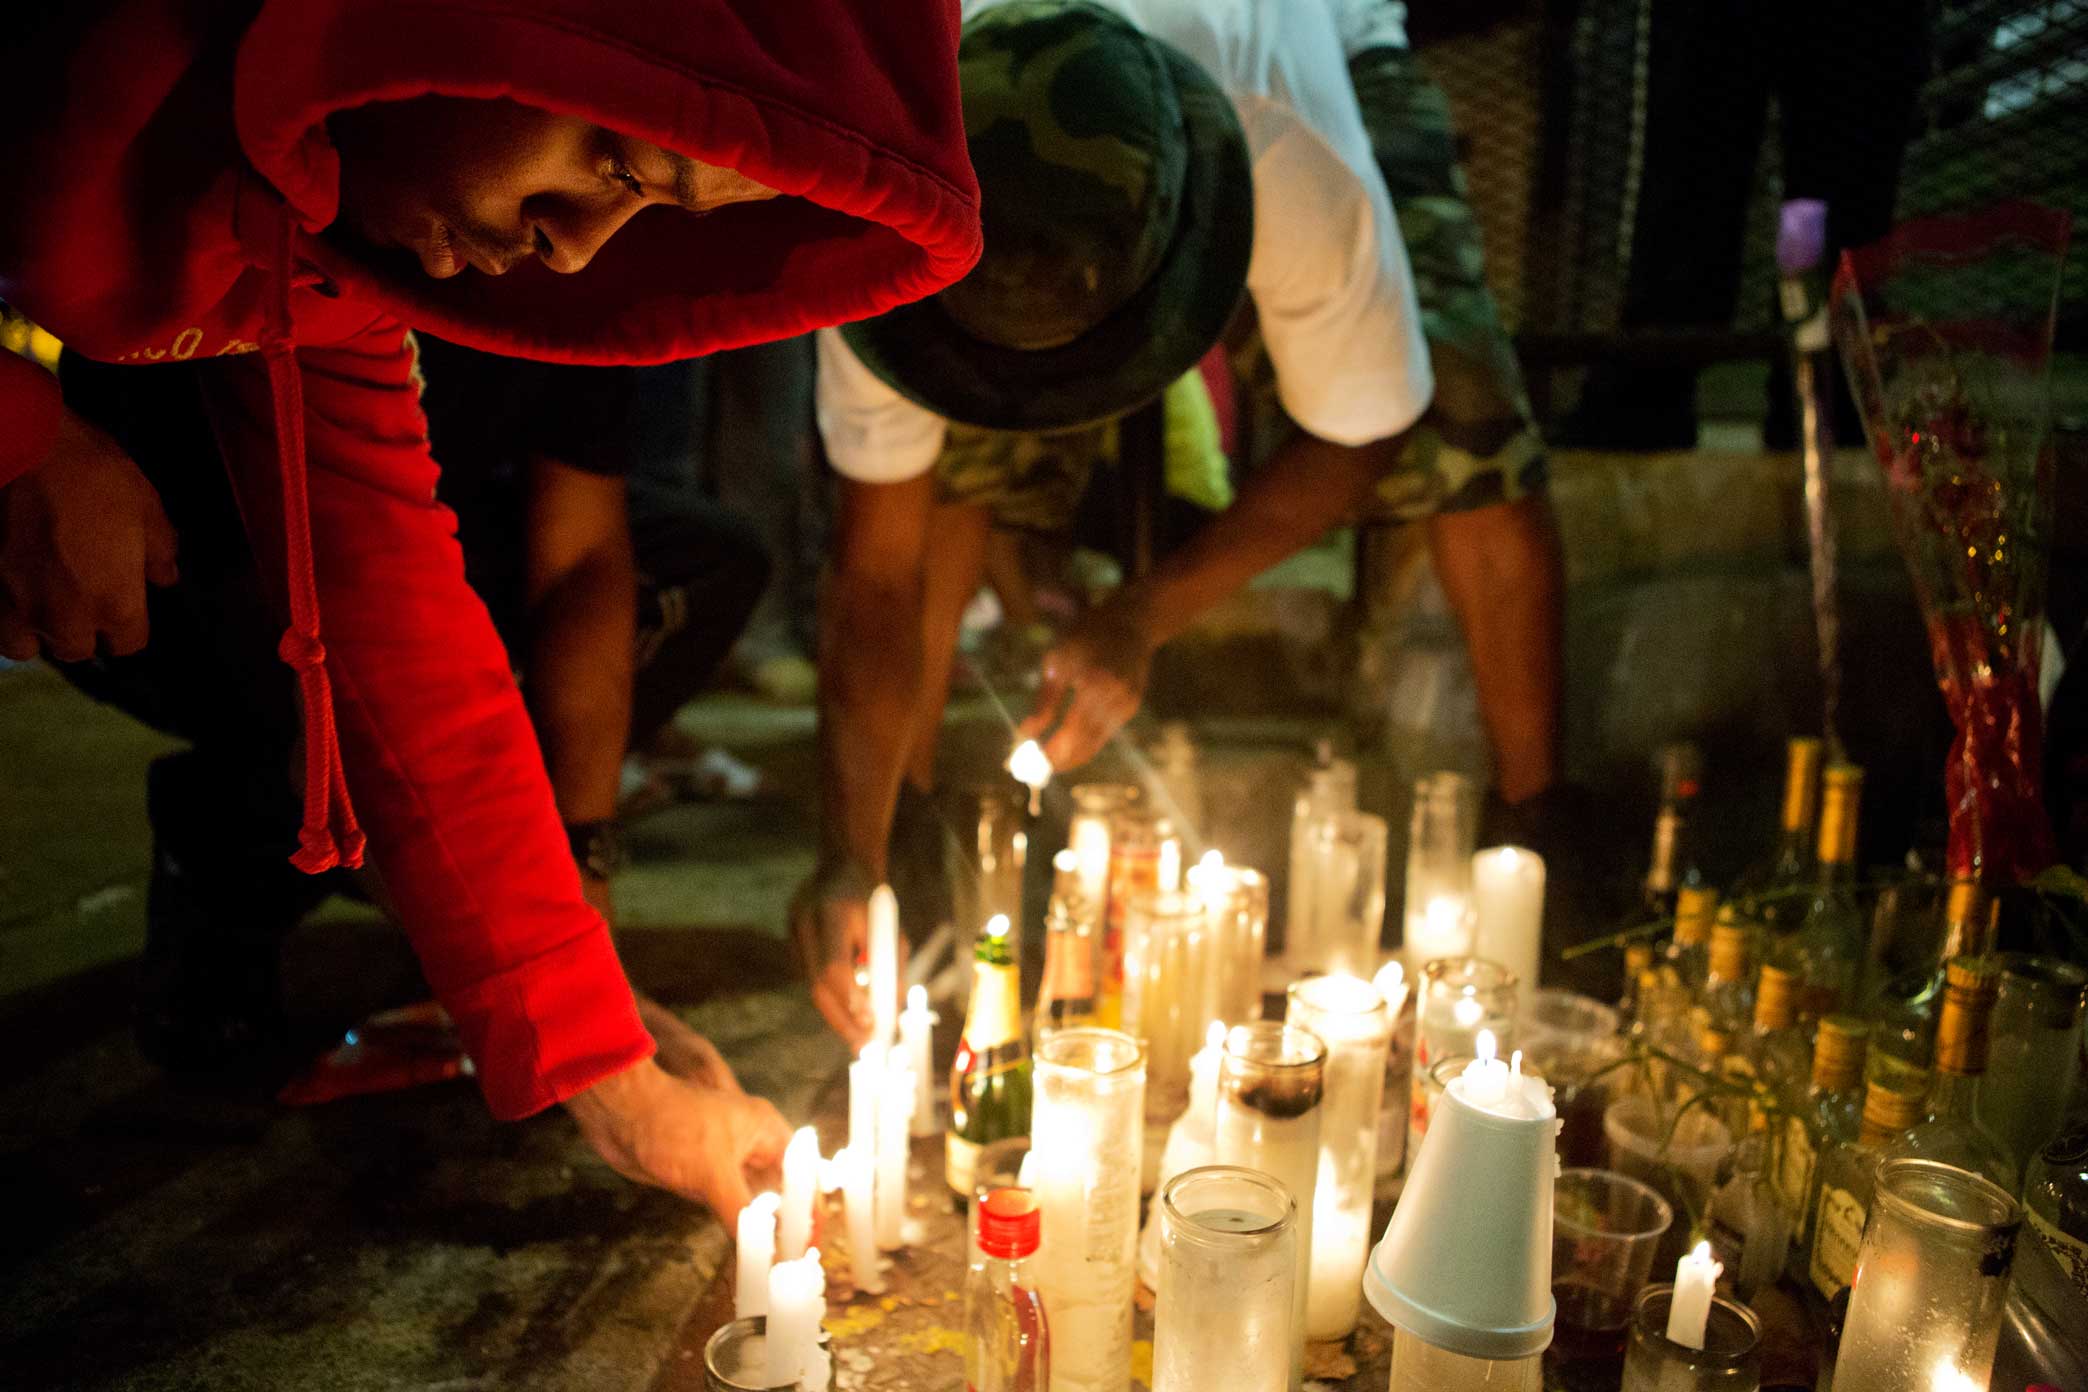  Locals light candles in memory of Olivia Brown a 23 year old who was gunned down at the Lincoln Houses at 60 East 132nd Street Harlem, New York.&nbsp; 